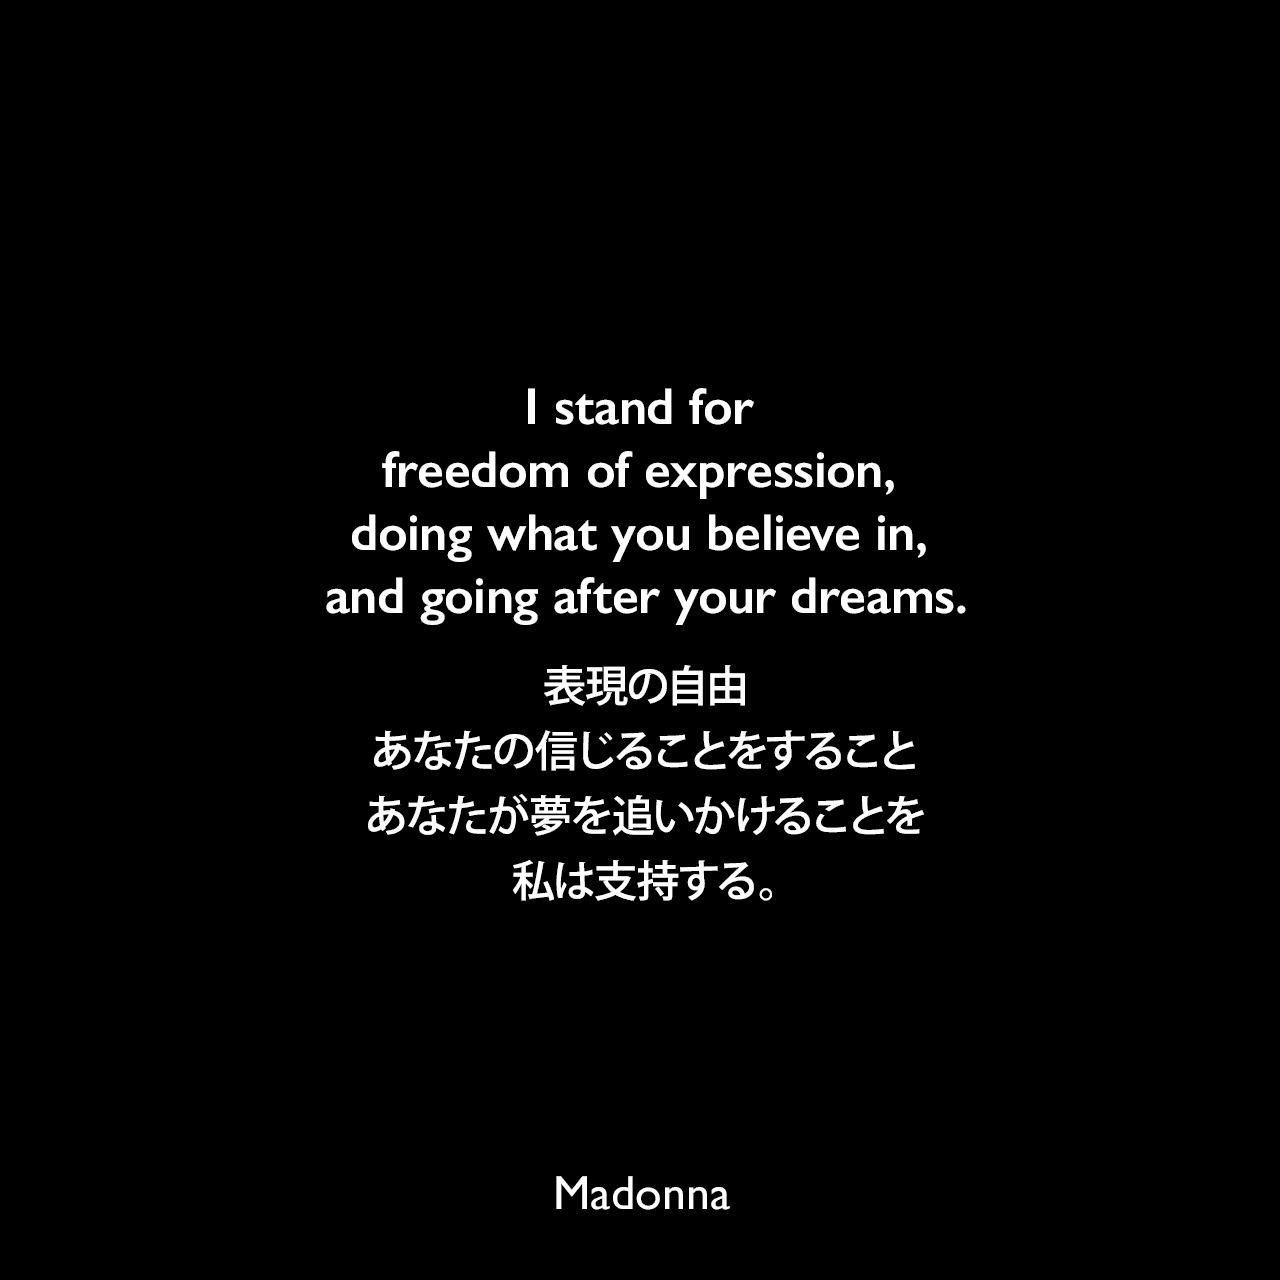 I stand for freedom of expression, doing what you believe in, and going after your dreams.表現の自由、あなたの信じることをすること、あなたが夢を追いかけることを私は支持する。